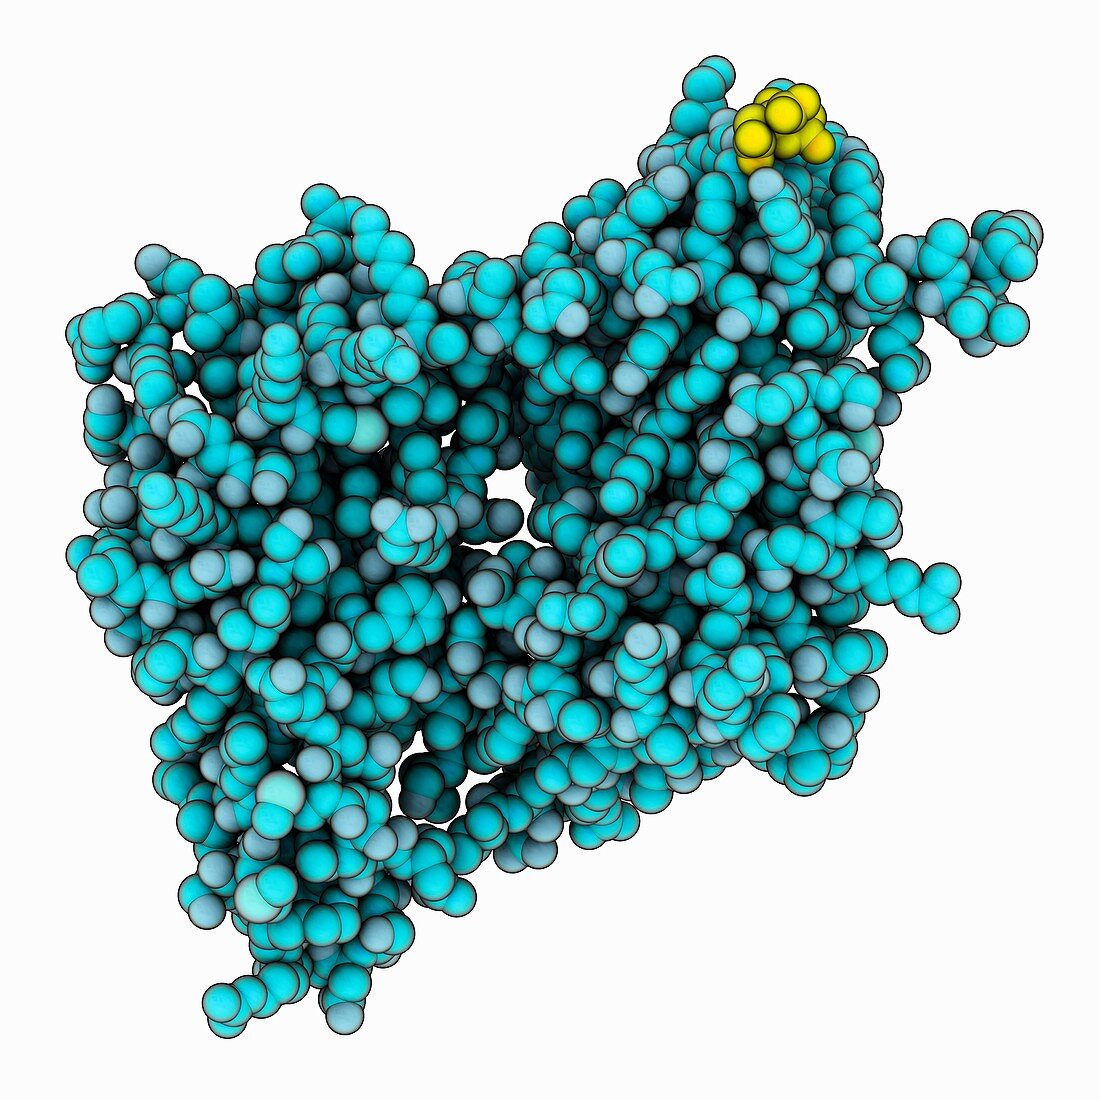 Nucleotidyltransferase fold protein MAB21L1